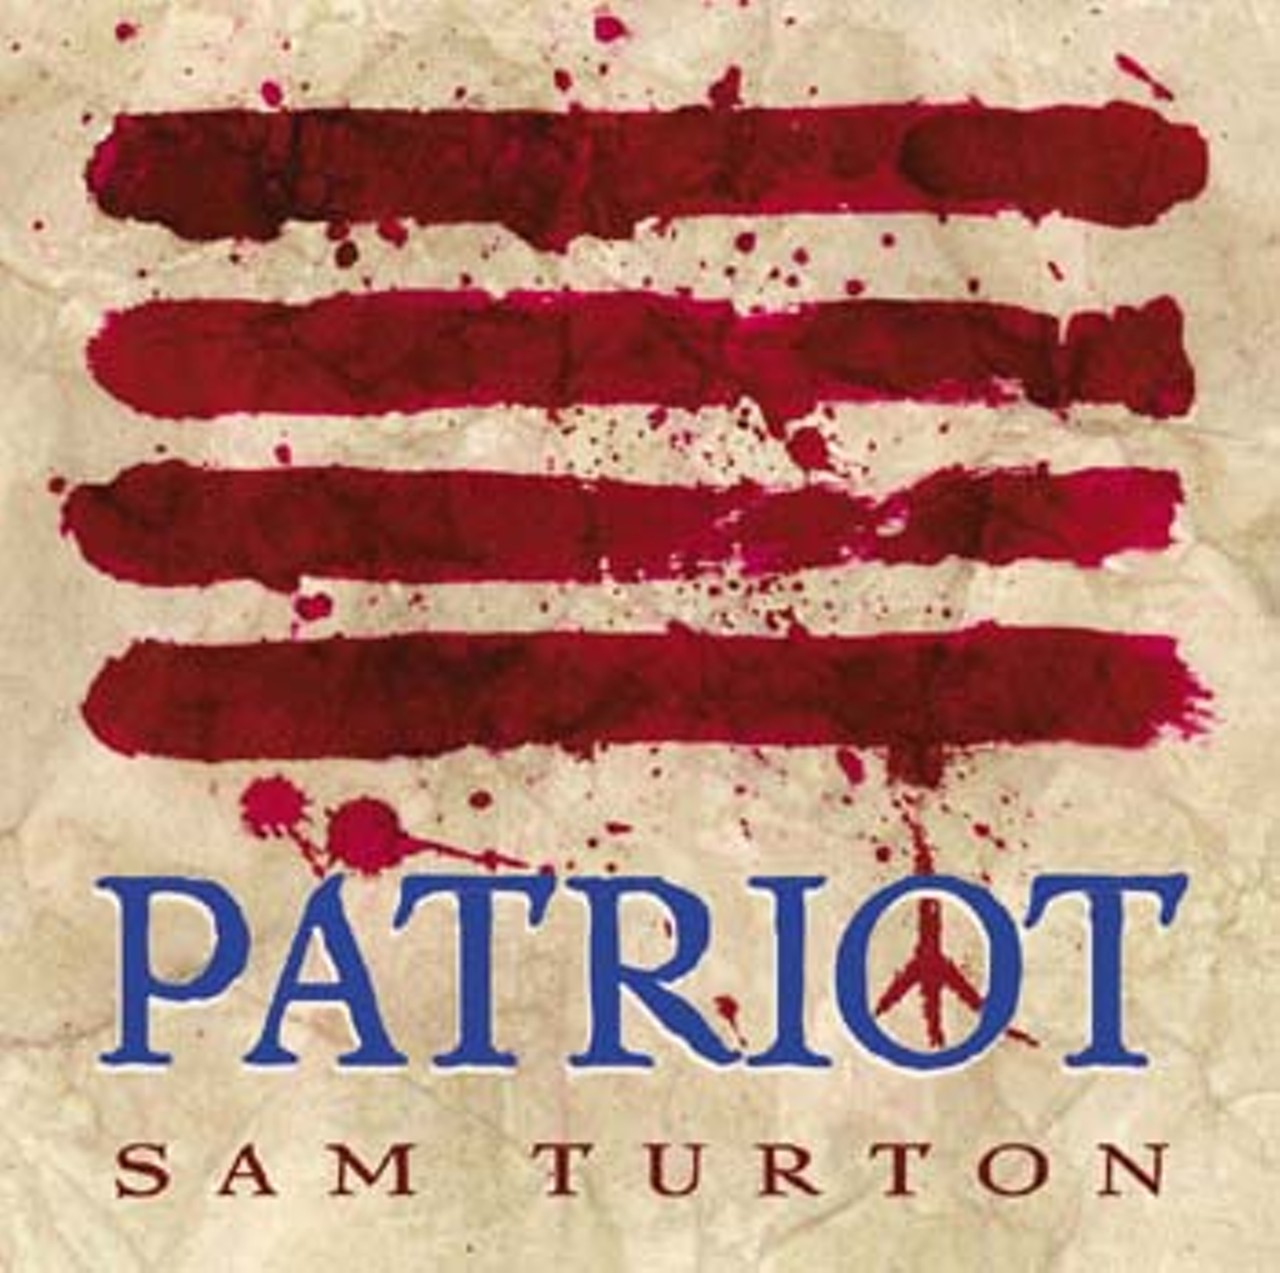 14. Sam Turton's "Patriot" is a toss-up. One one hand, smeared blood and a bloody peace sign aren't exactly the most glistening patriotic images (unless you're somehow spilling said blood for the motherland). On the other, Turton believes that "when citizens of a democracy believe that their present government is detrimental to their life and country, it is patriotic to affect change by dissent and democratic process." Dissent: Patriotic or un? You decide.